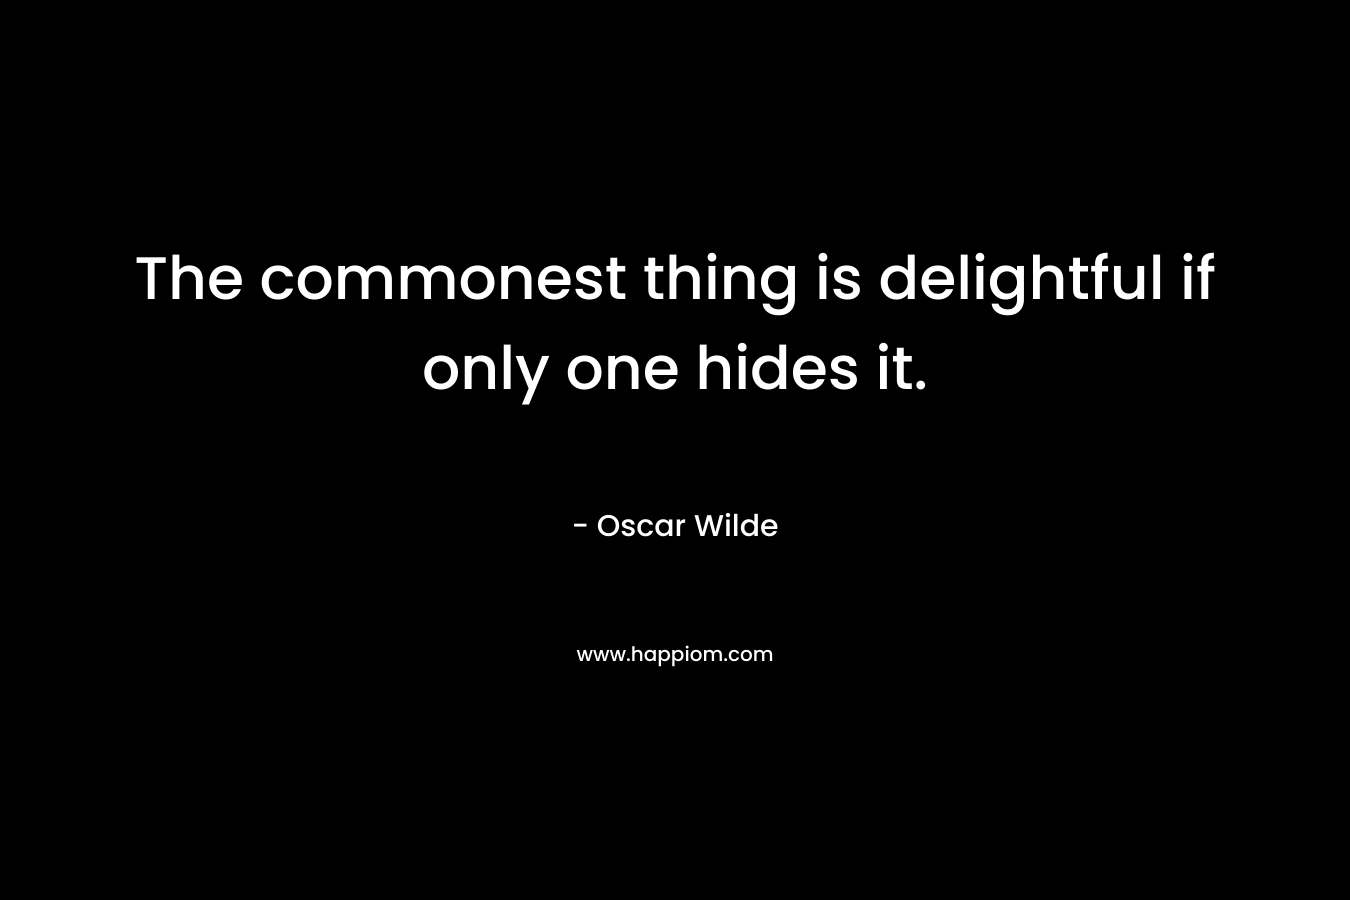 The commonest thing is delightful if only one hides it. – Oscar Wilde